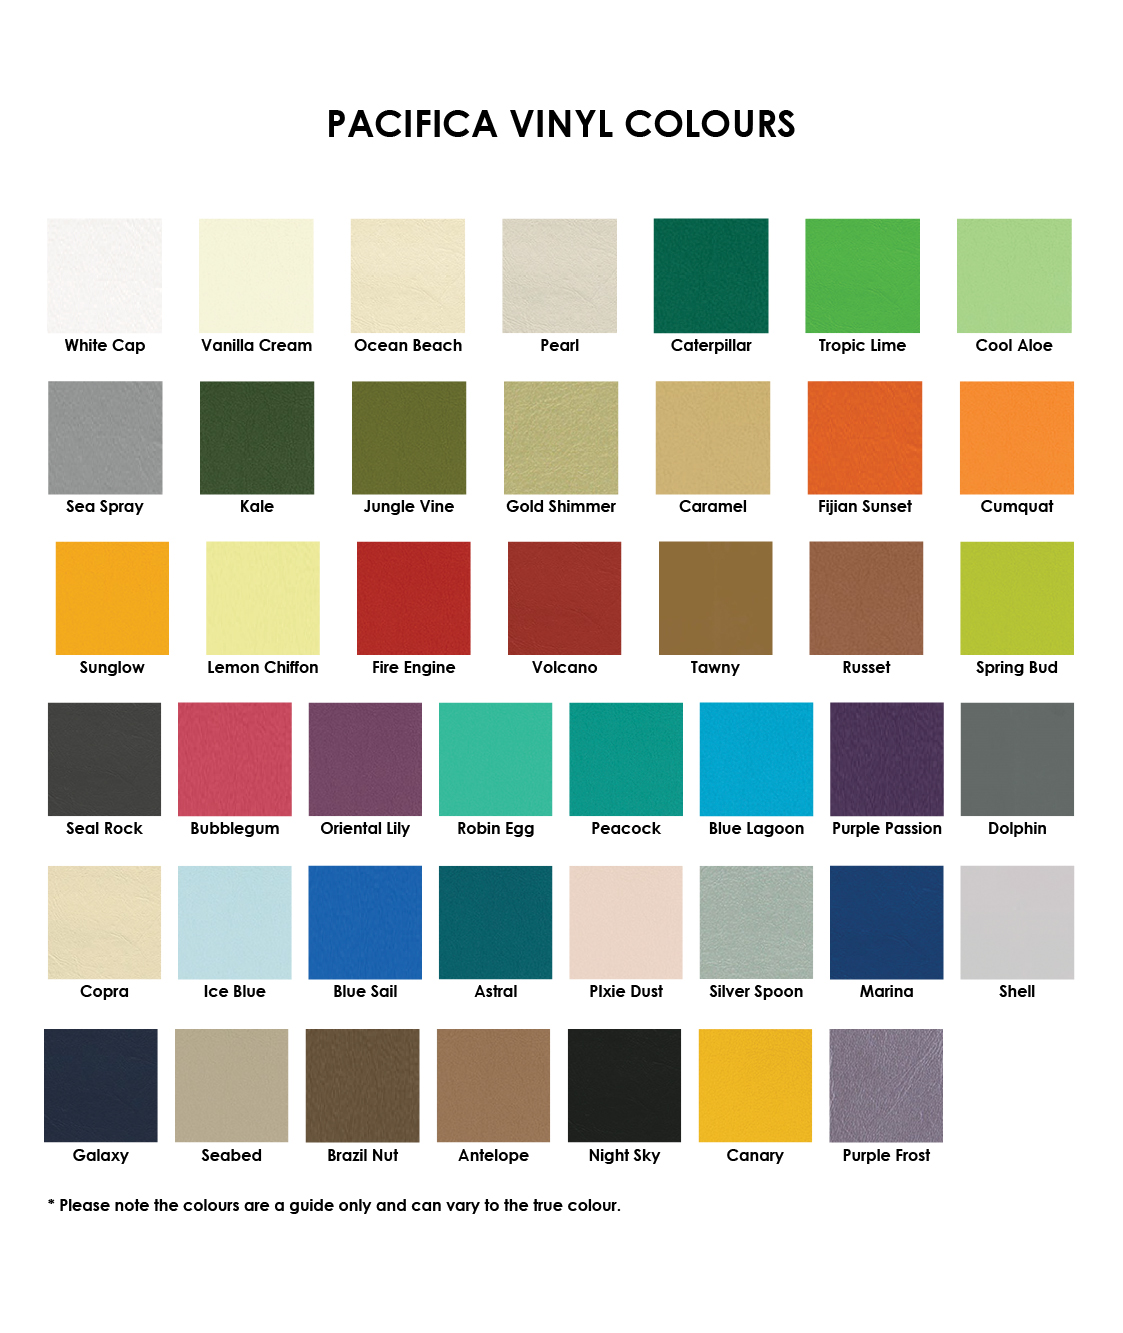 Pacifica Vinyl Colour choices for chairs - Arteil Ergonomic Office Chairs